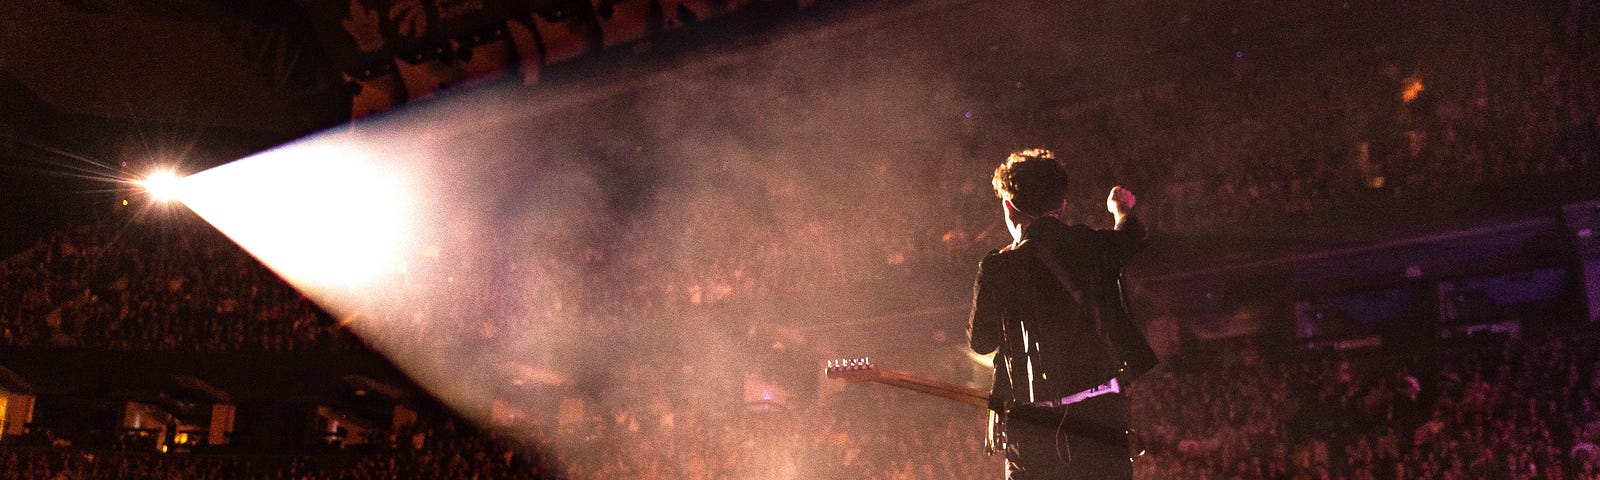 guitar player standing alone on an enormous filled stadium stage